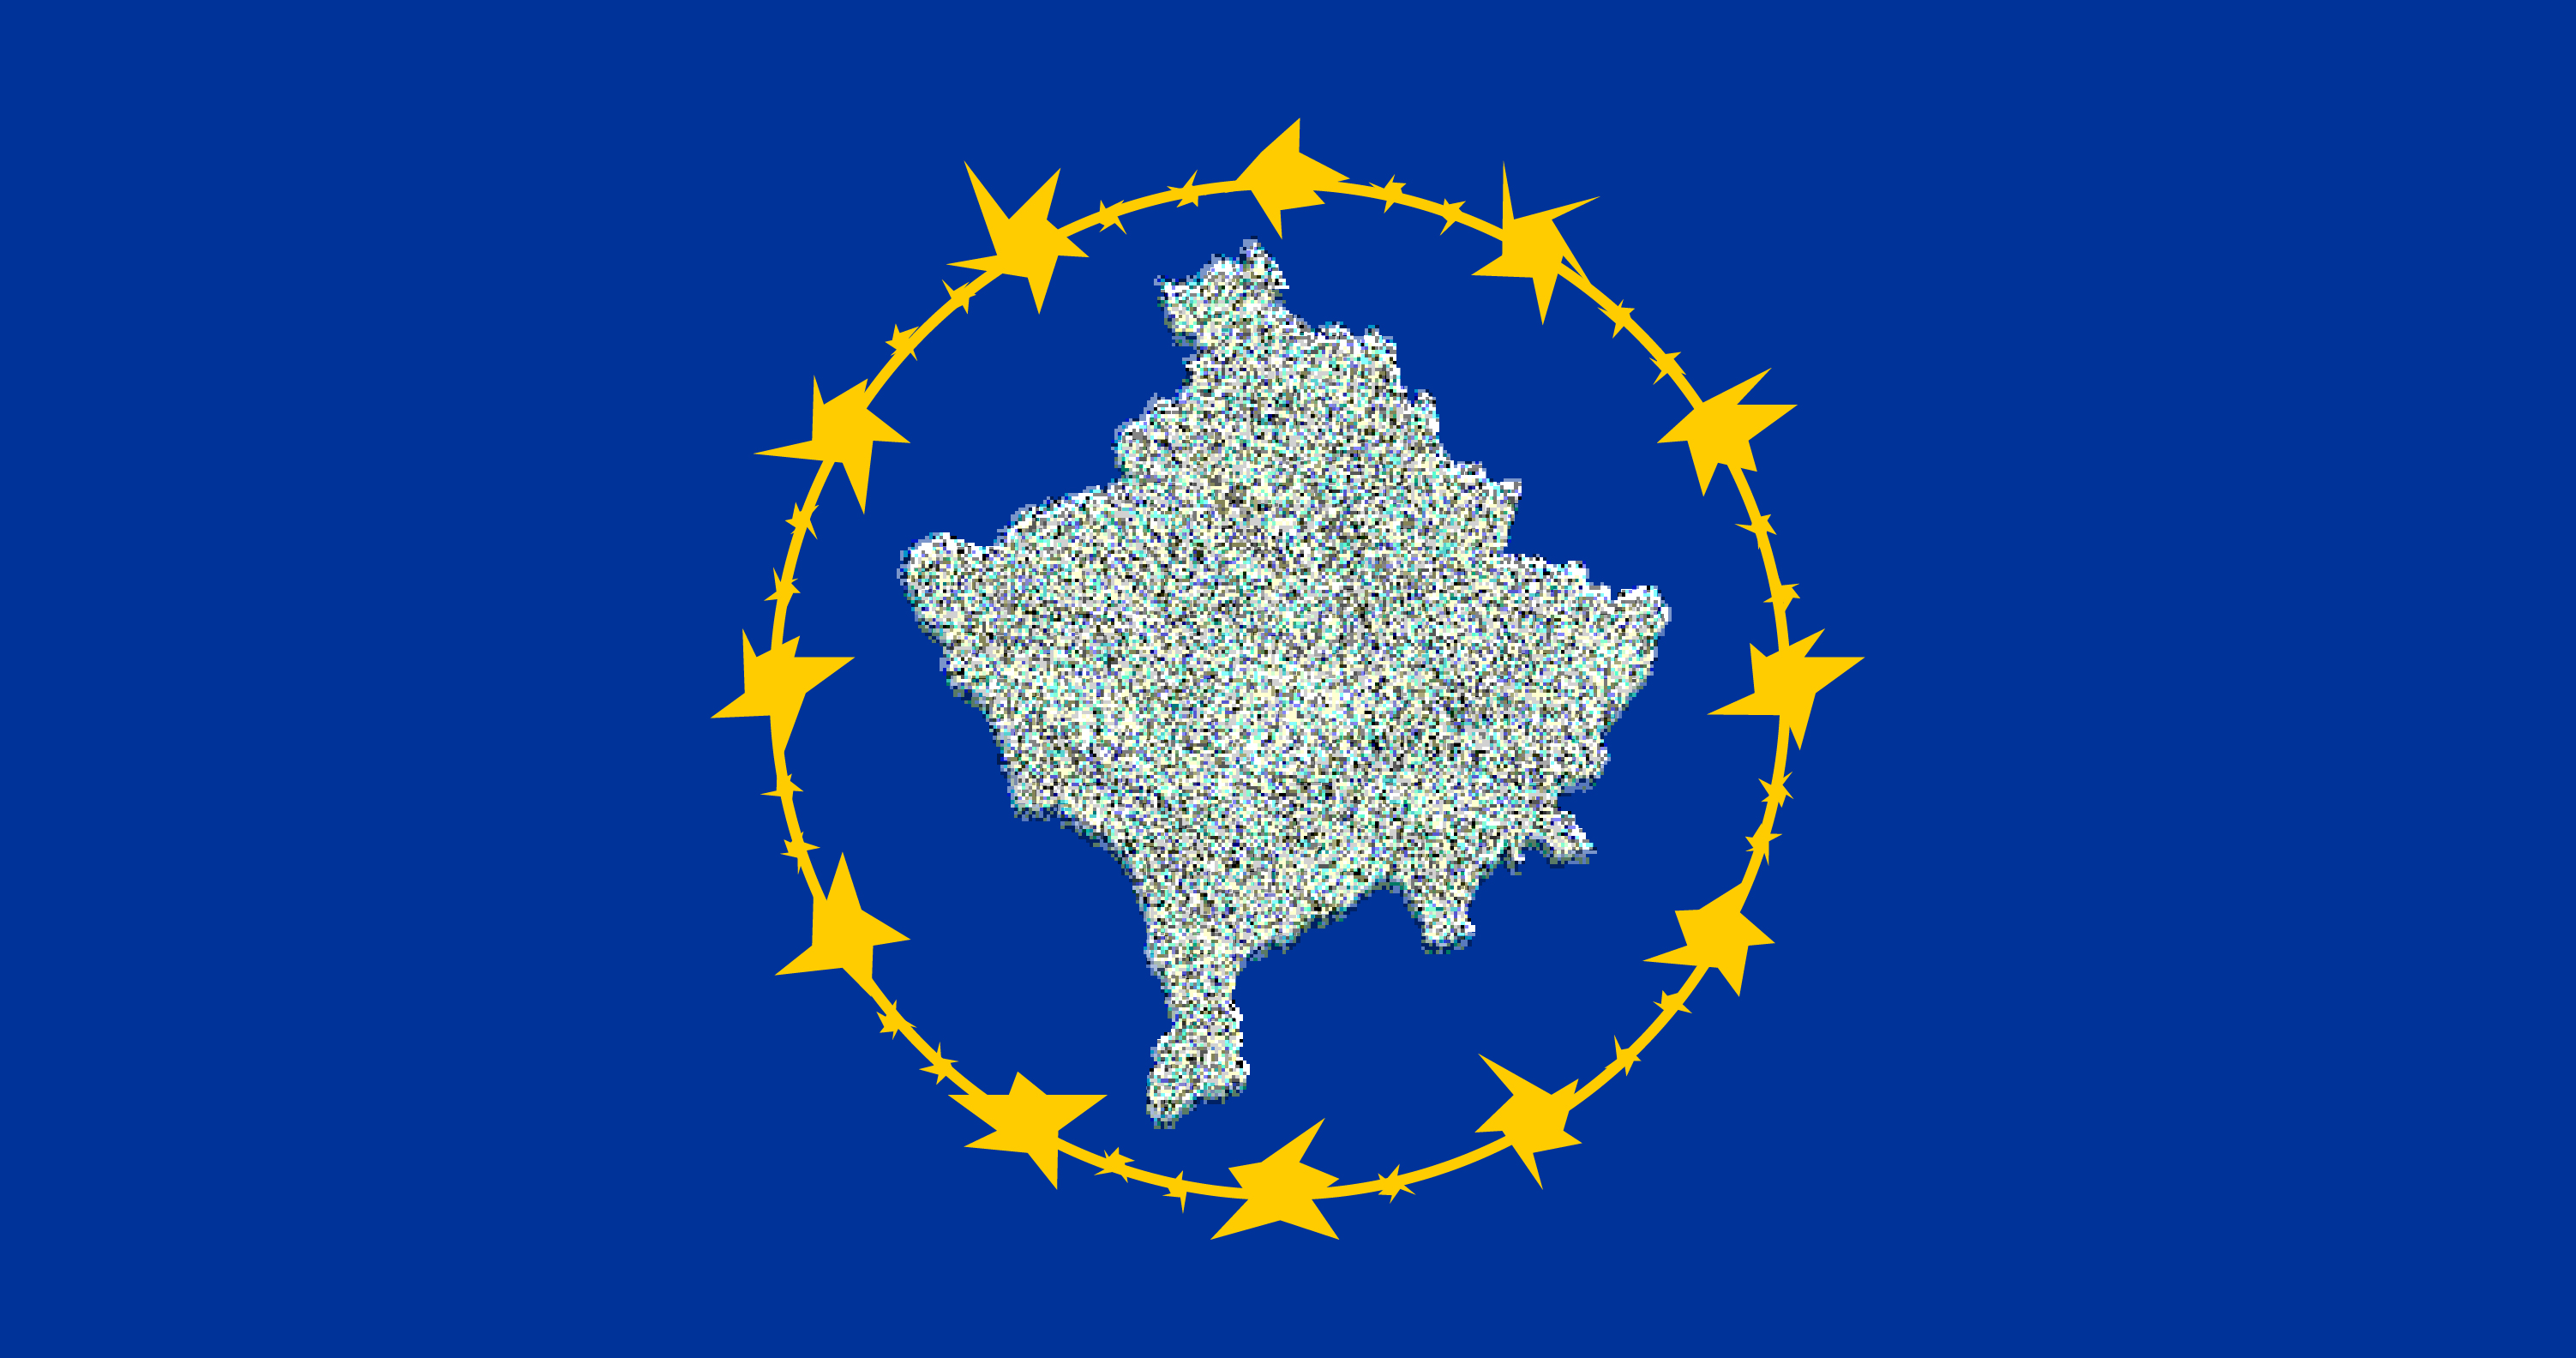 Kosovo in 'early stages' of its EU path, says EC progress report ...